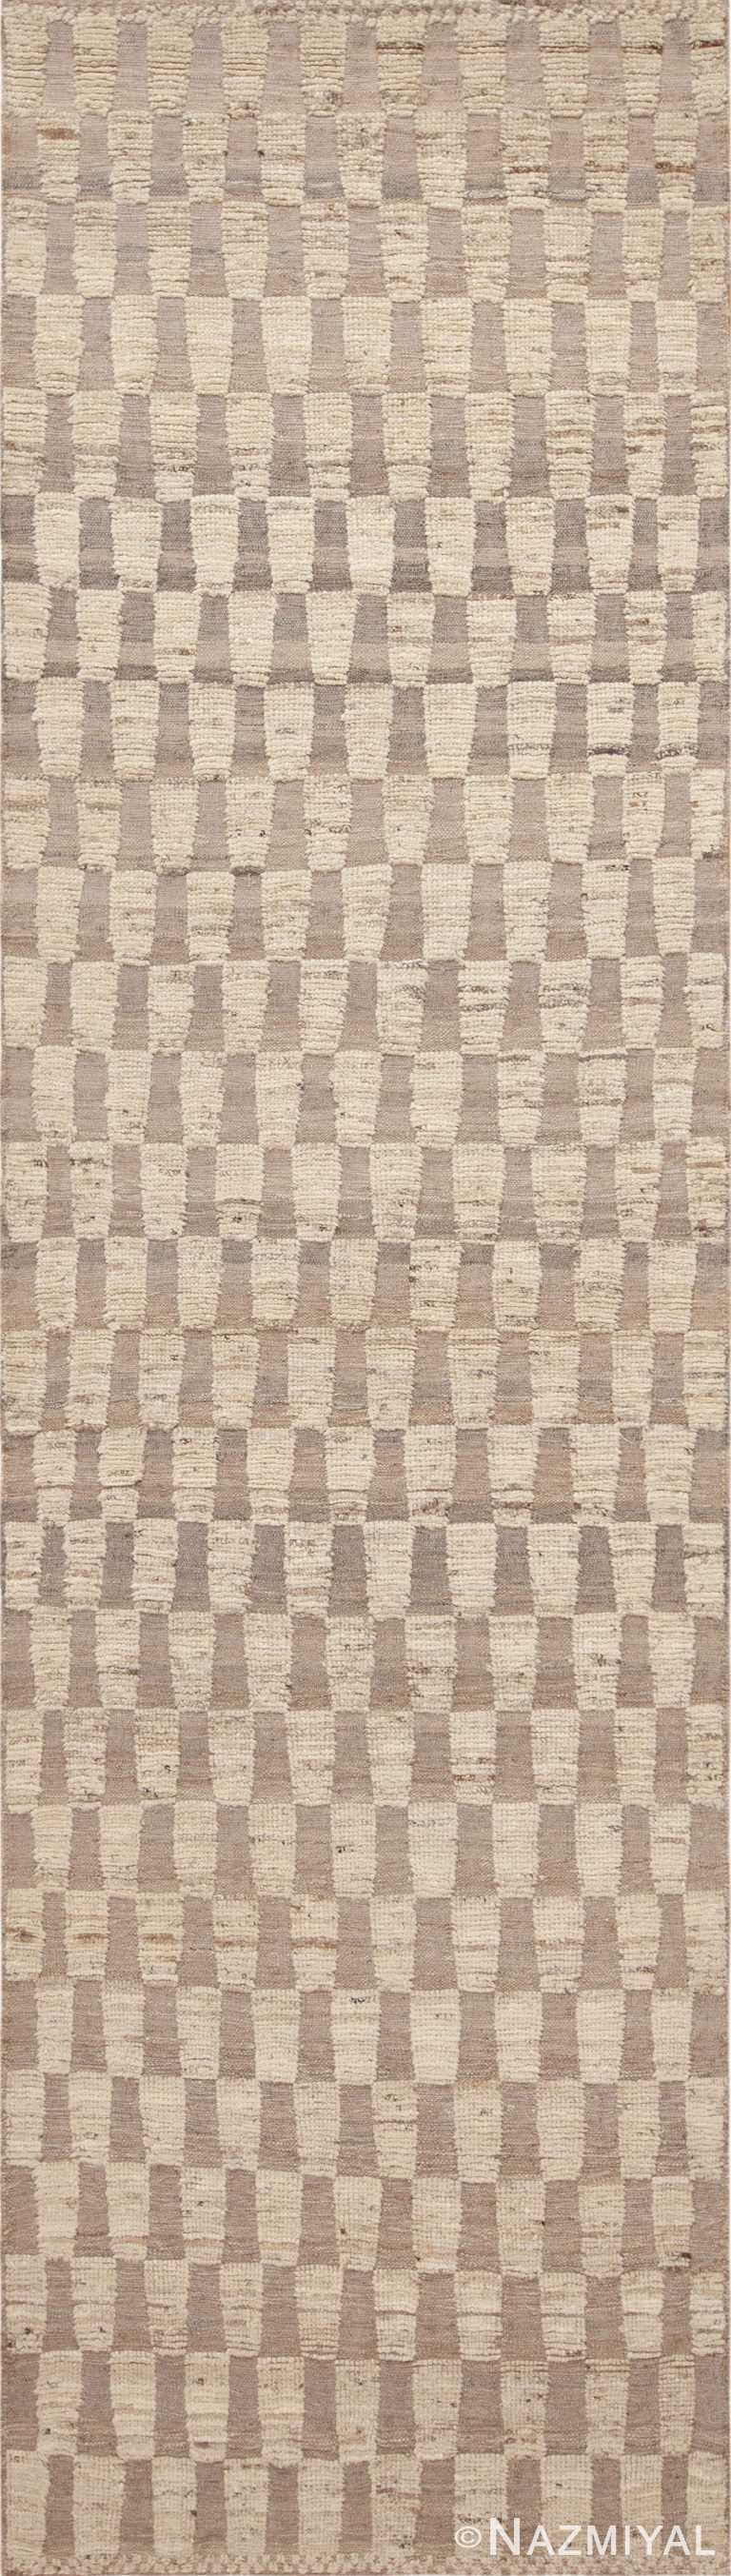 Light Cream and Tan Color Geometric Modern Hallway High Low Wool Pile Runner Rug 11103 by Nazmiyal Antique rugs